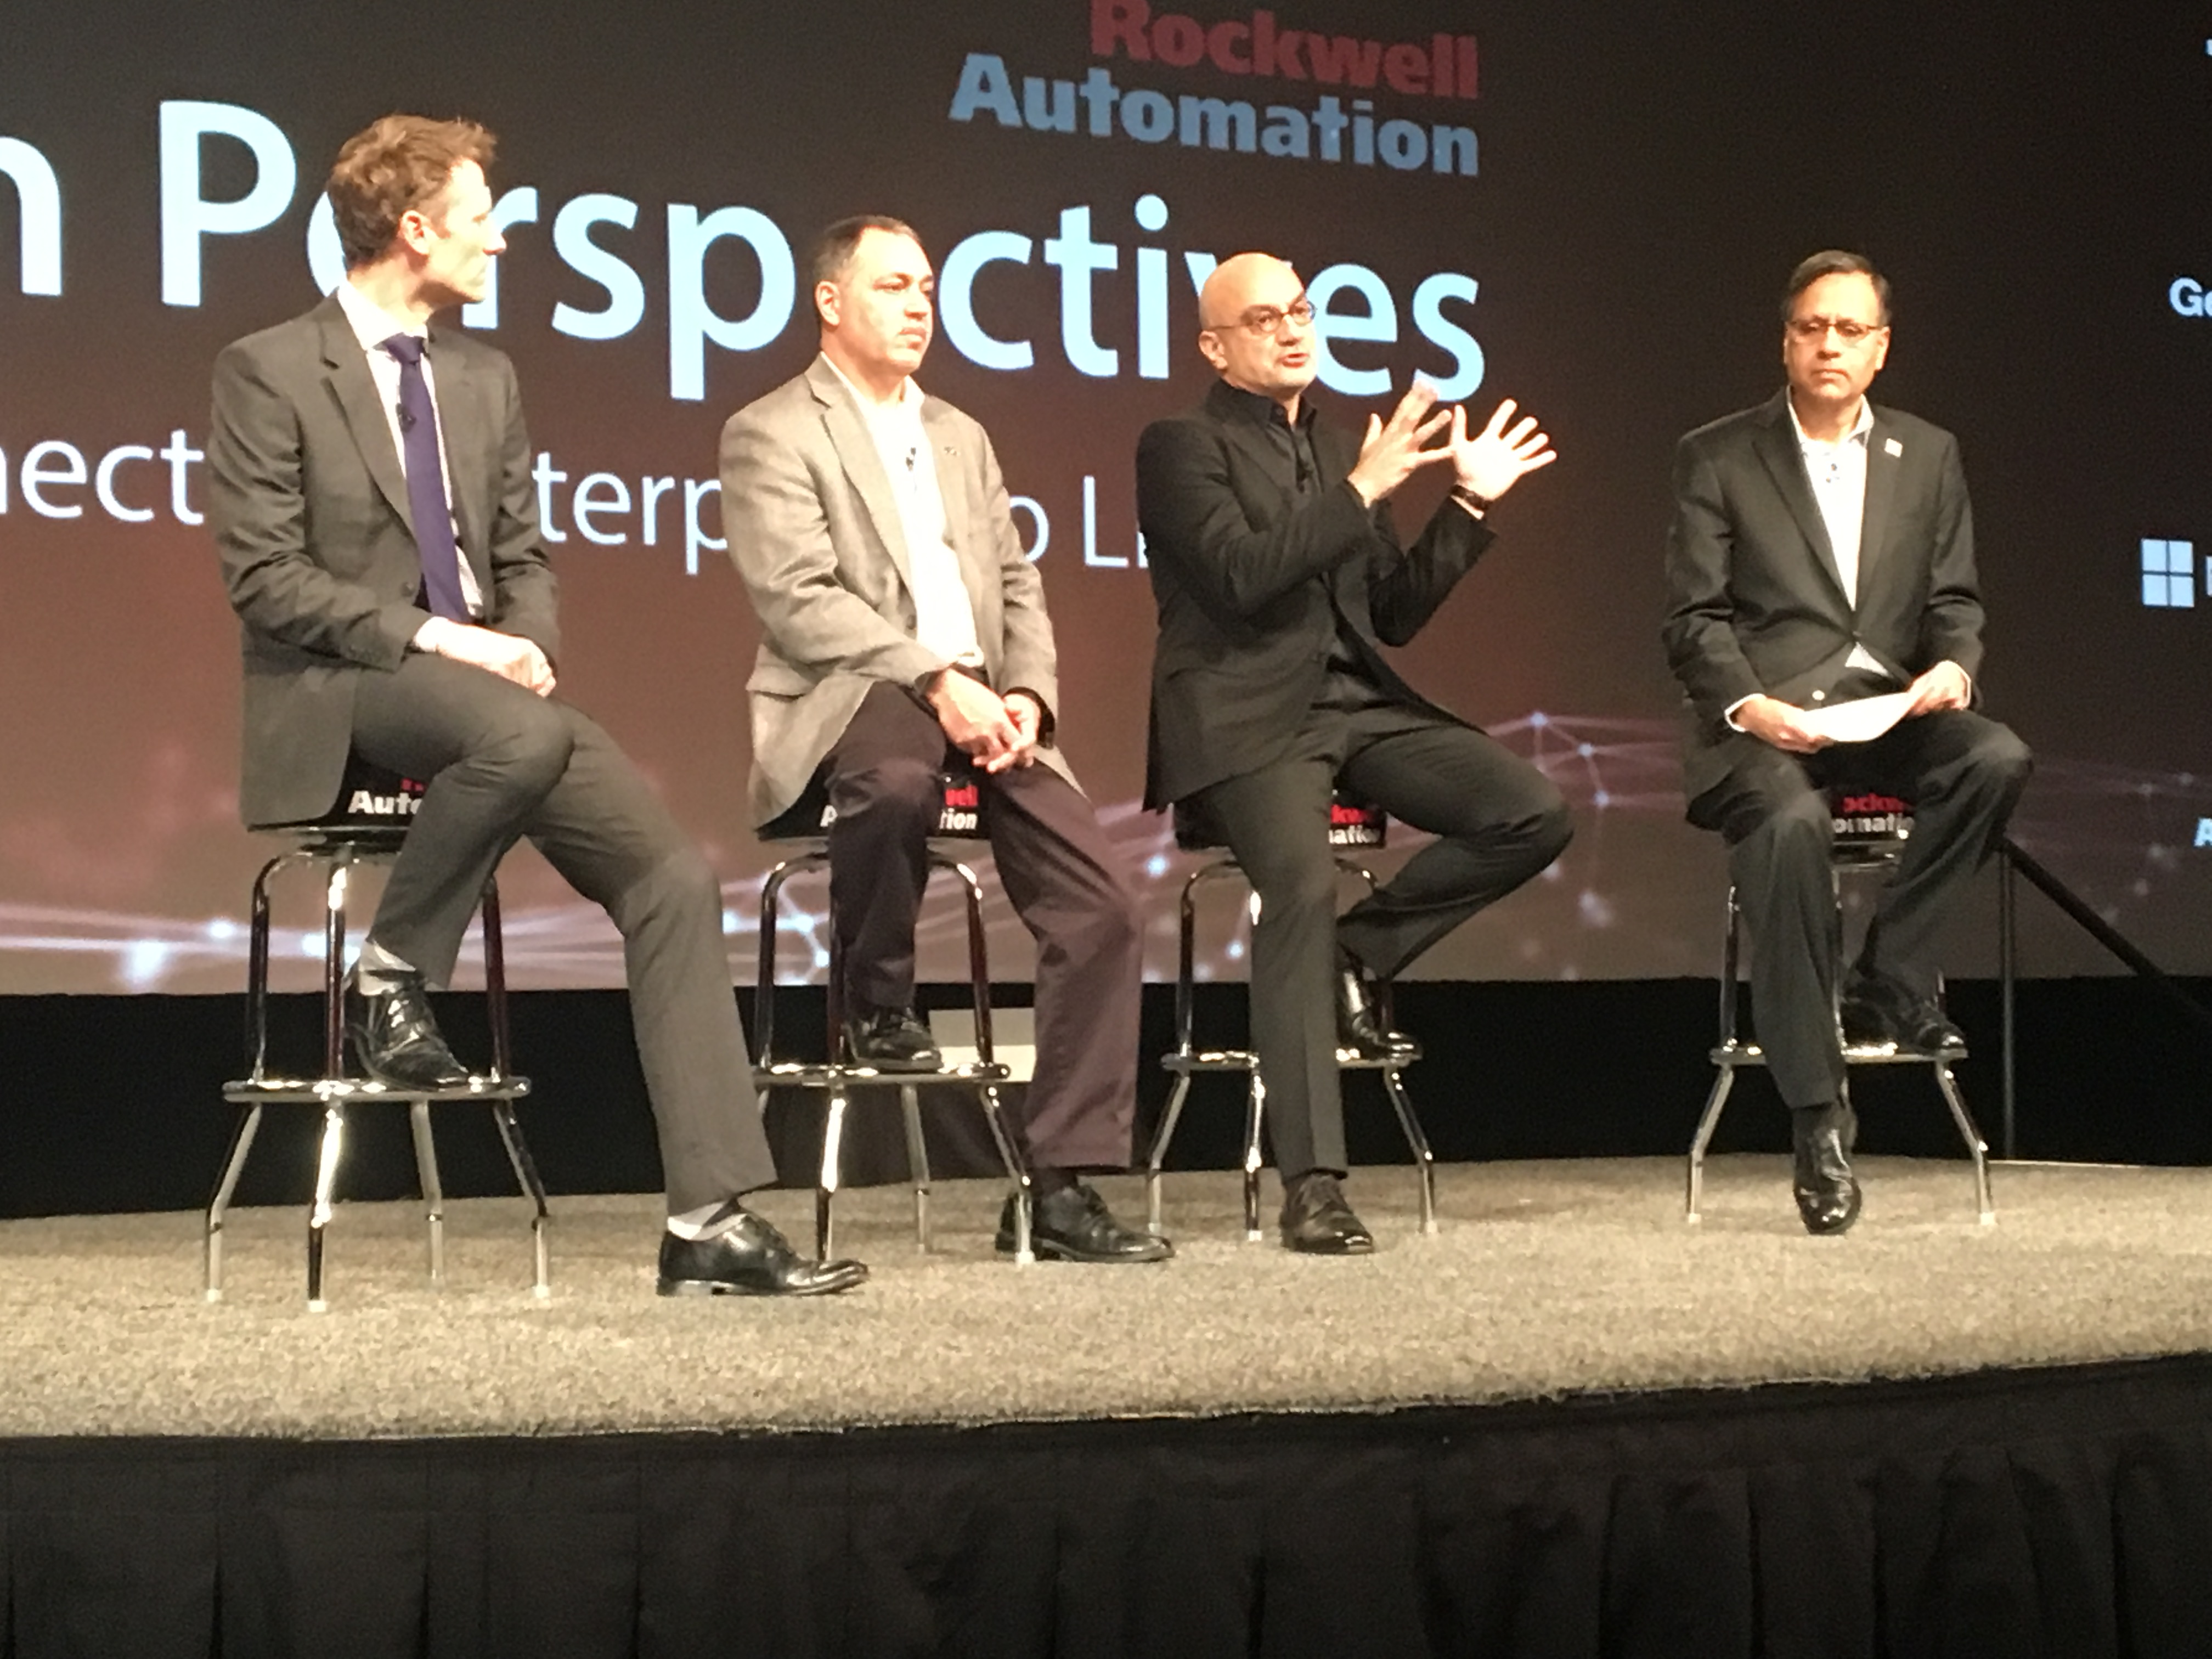 Automation Perspectives Kicks Off Rockwell’s Automation Fair 2016